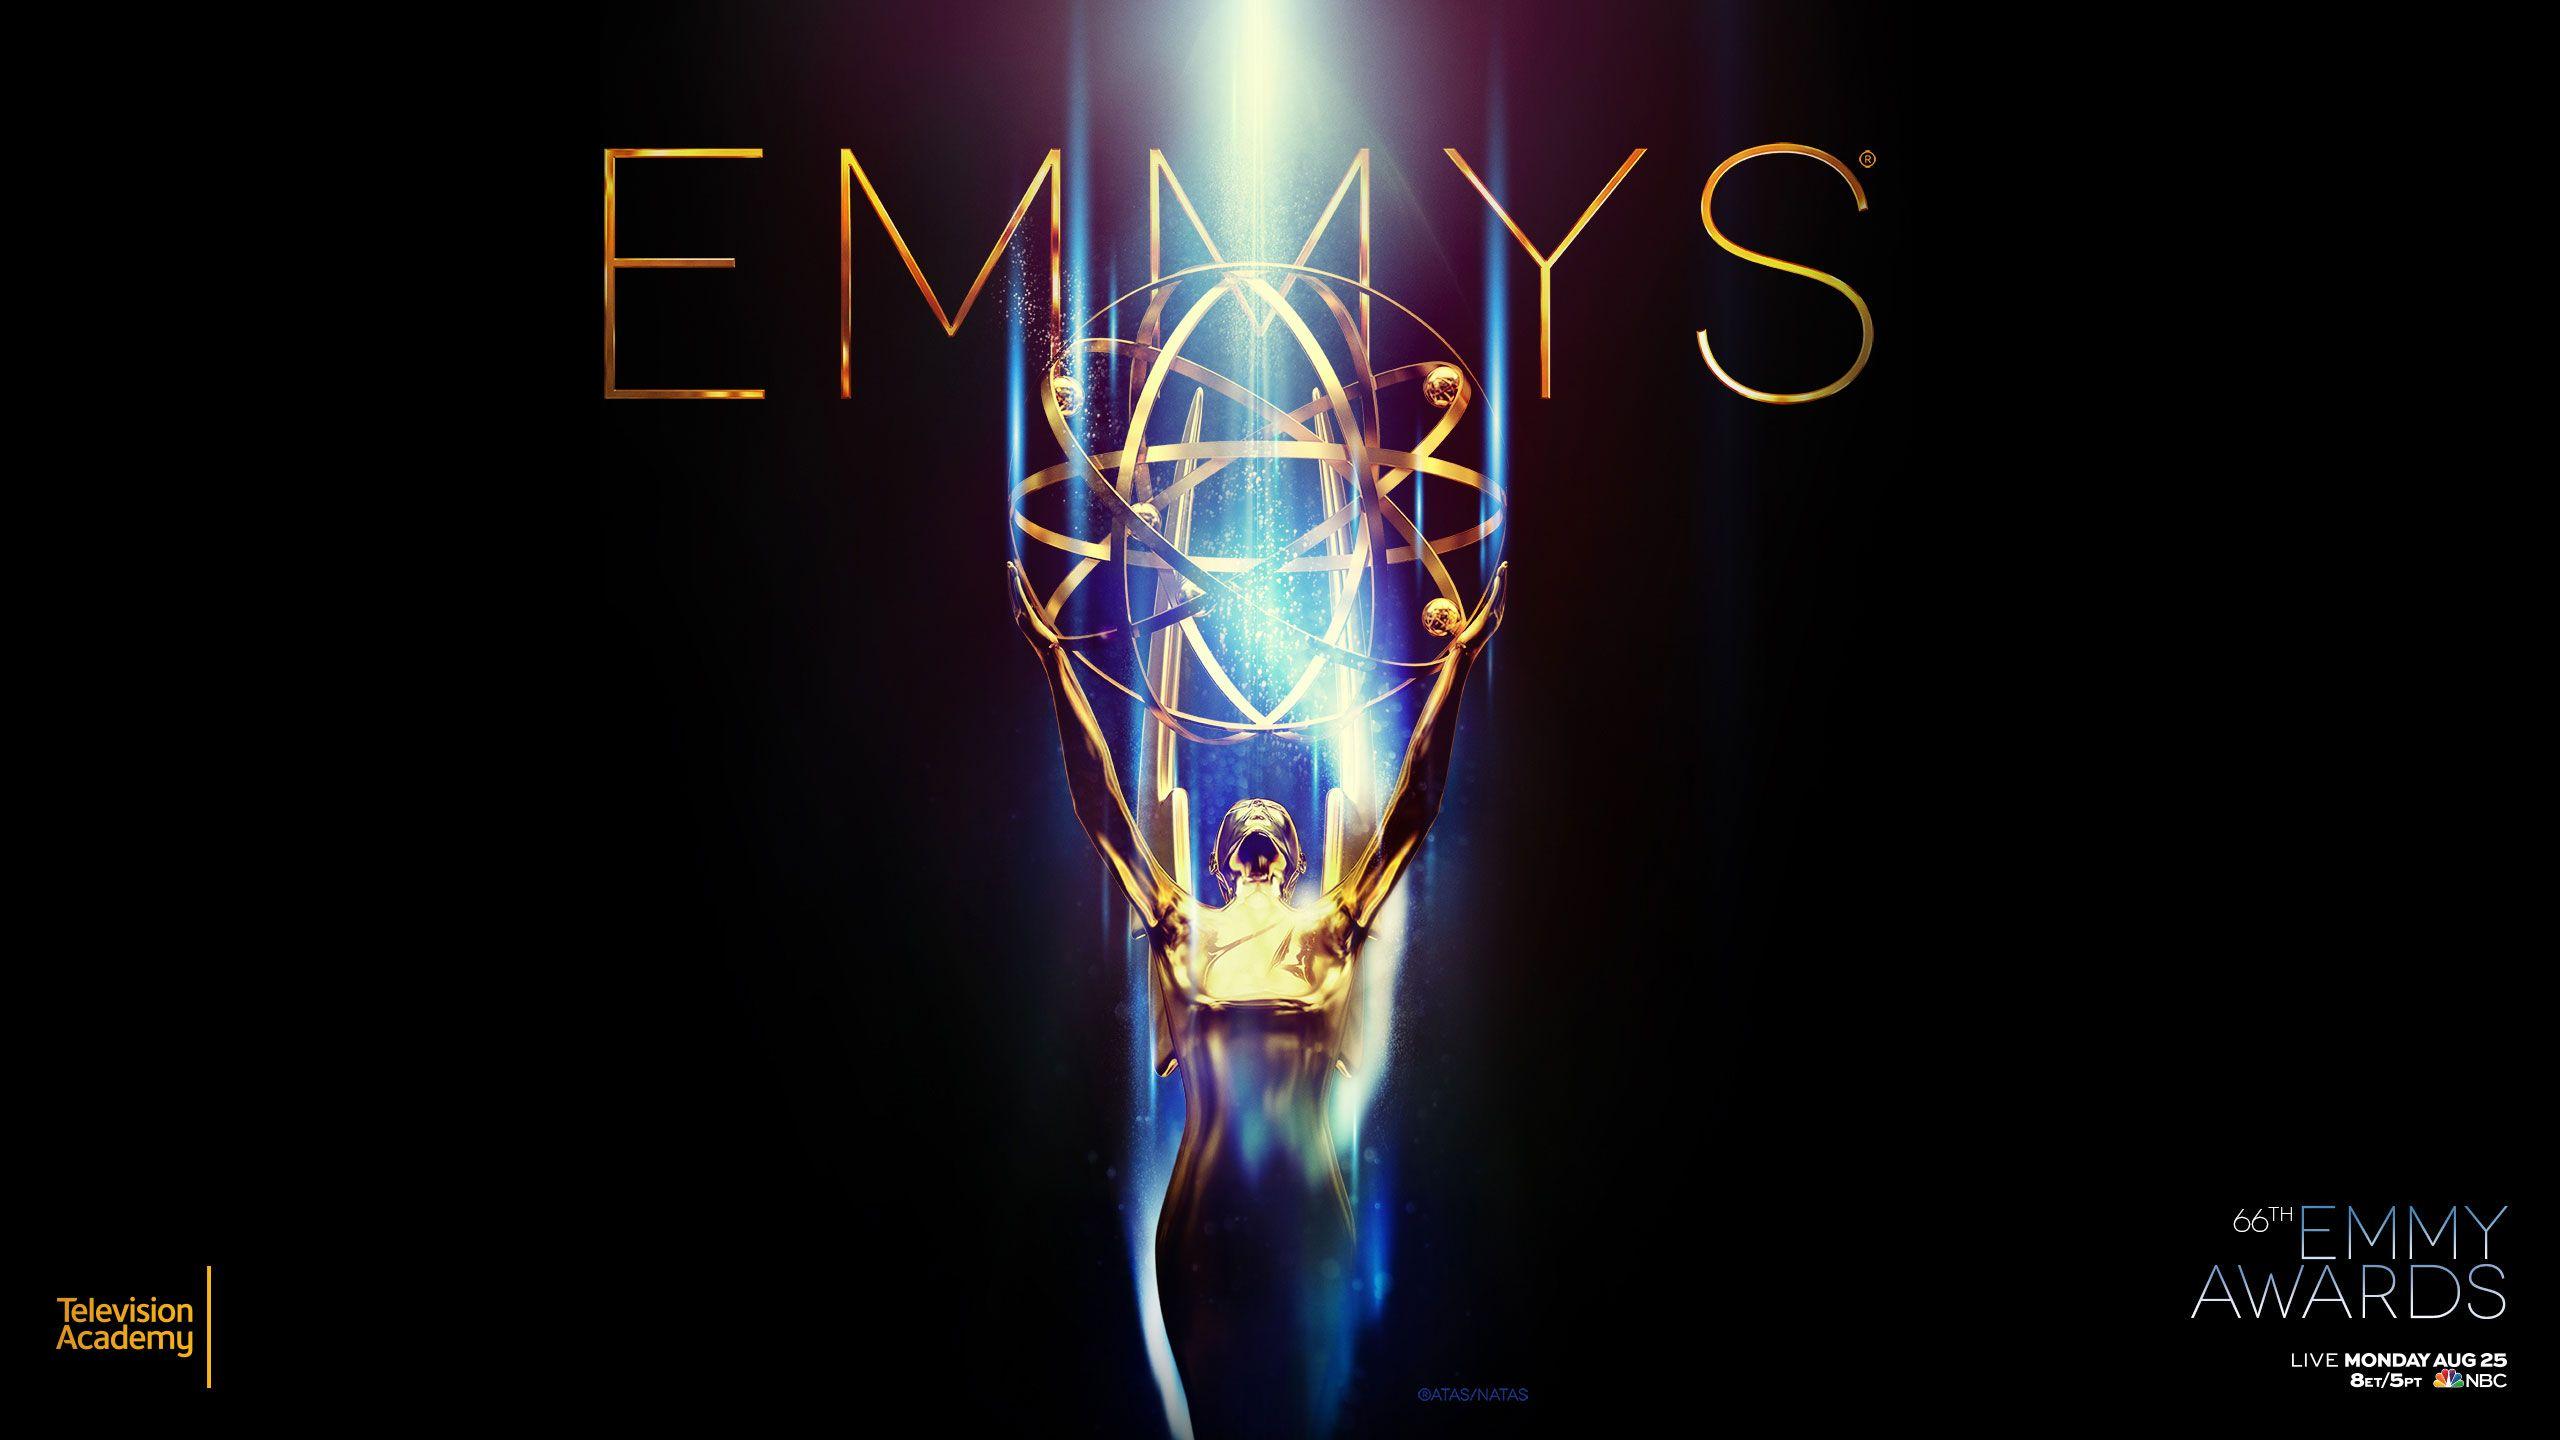 Emmy Awards: Winners, Losers, and all that's in between